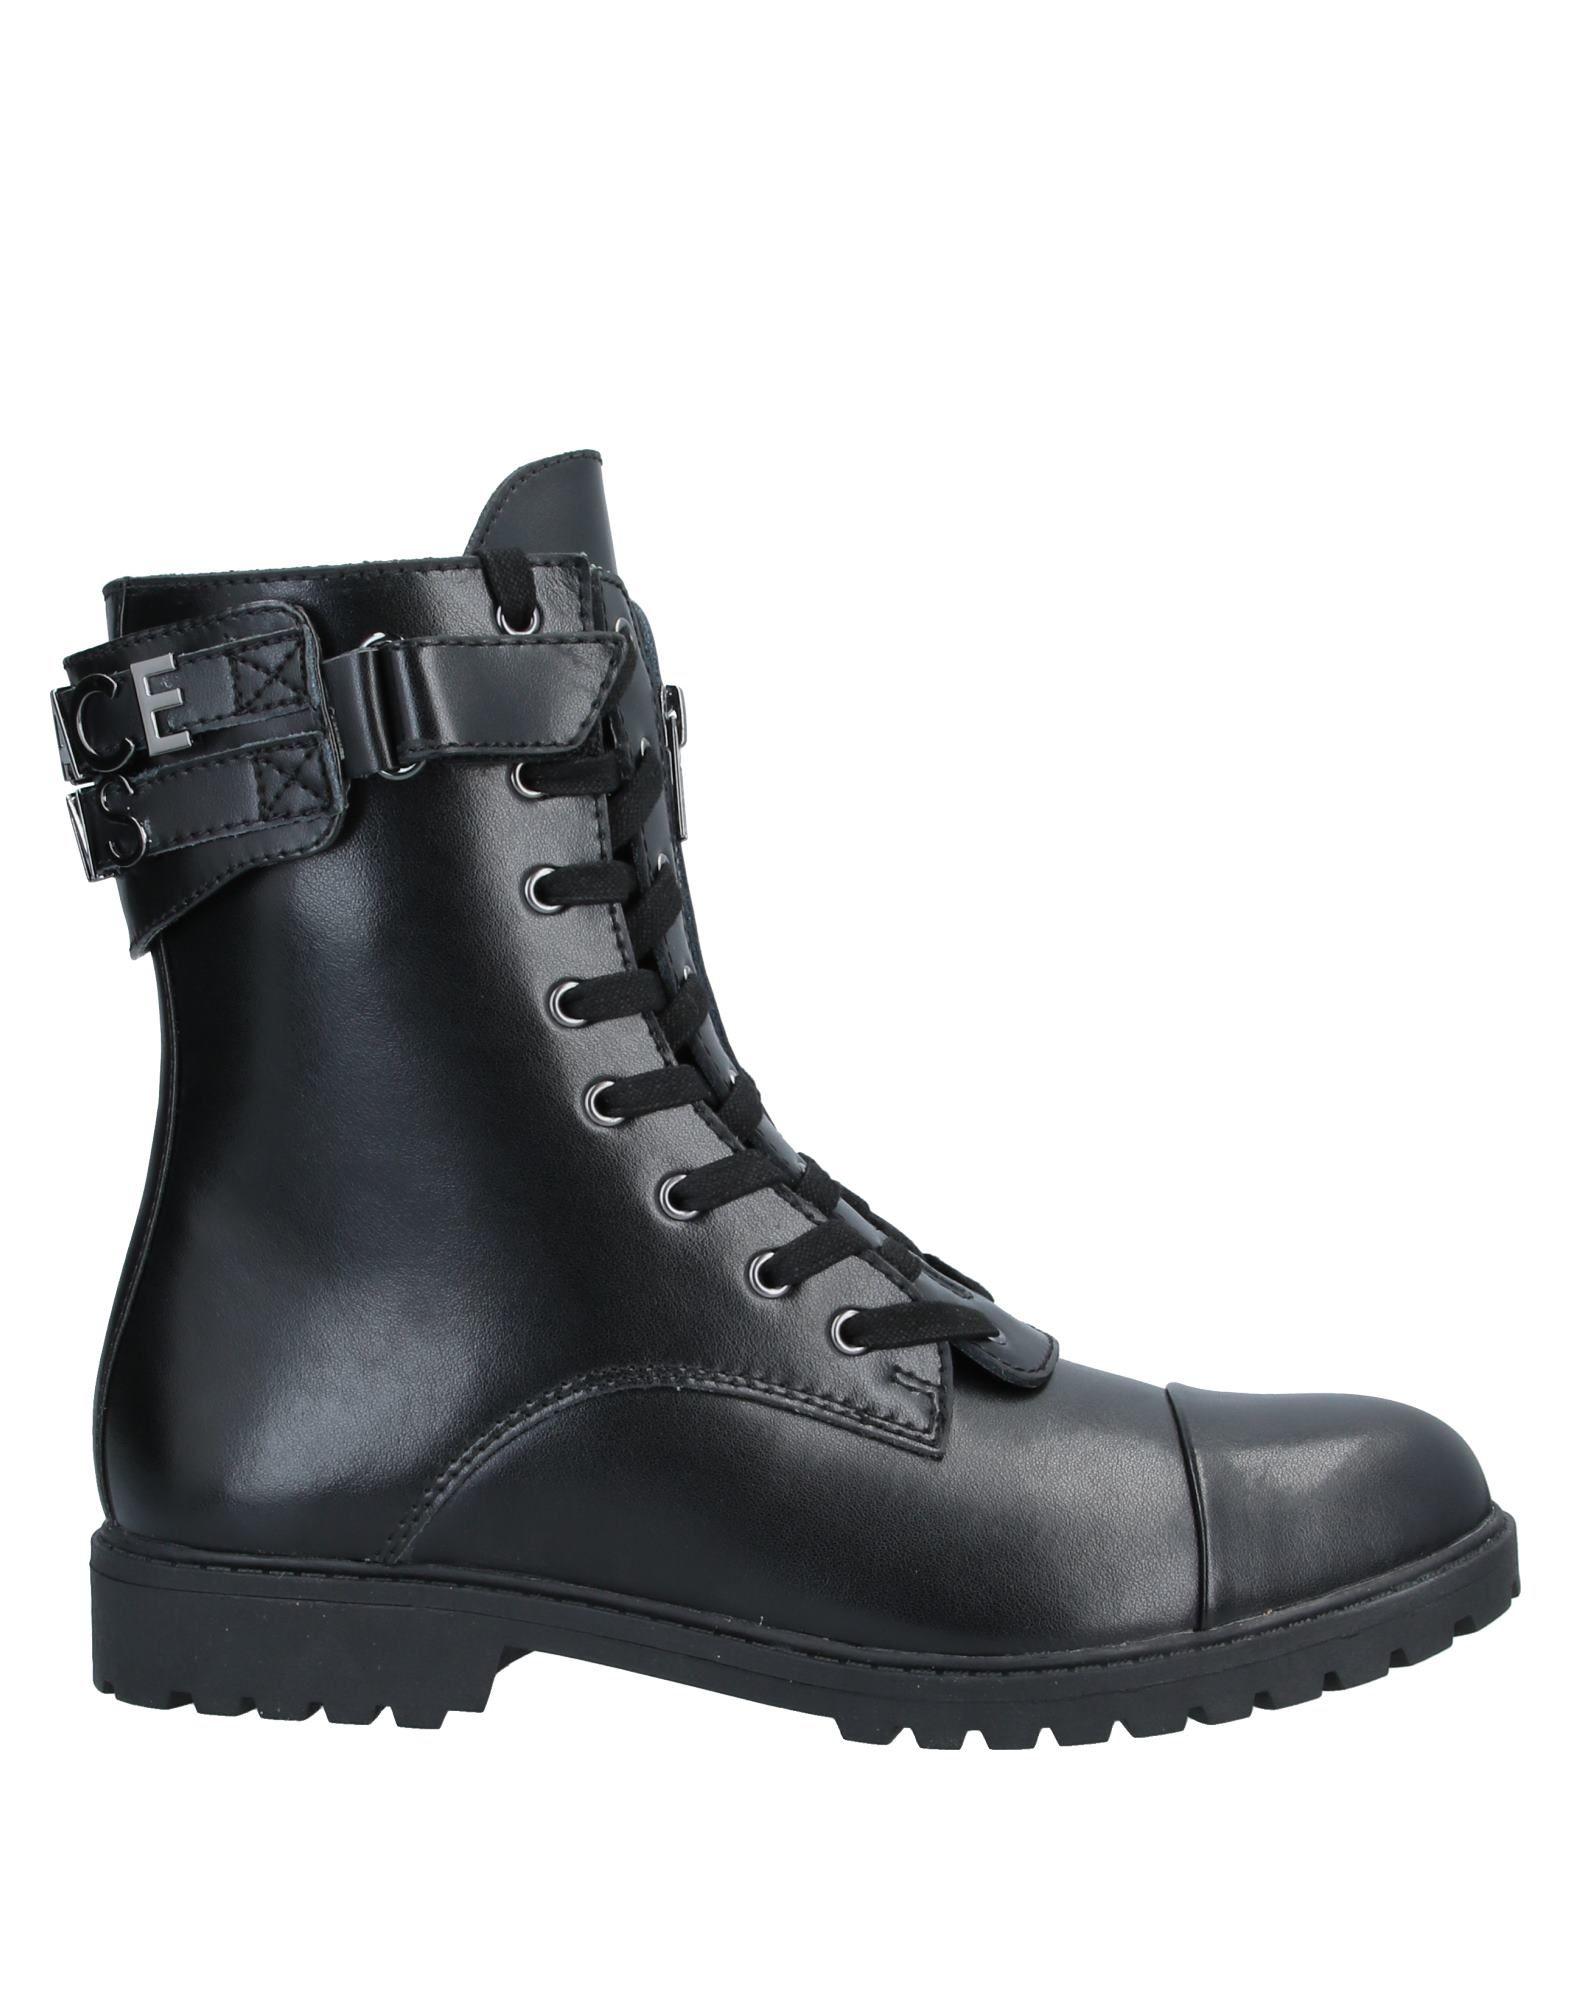 Versace Jeans Ankle Boots in Black for Men - Lyst